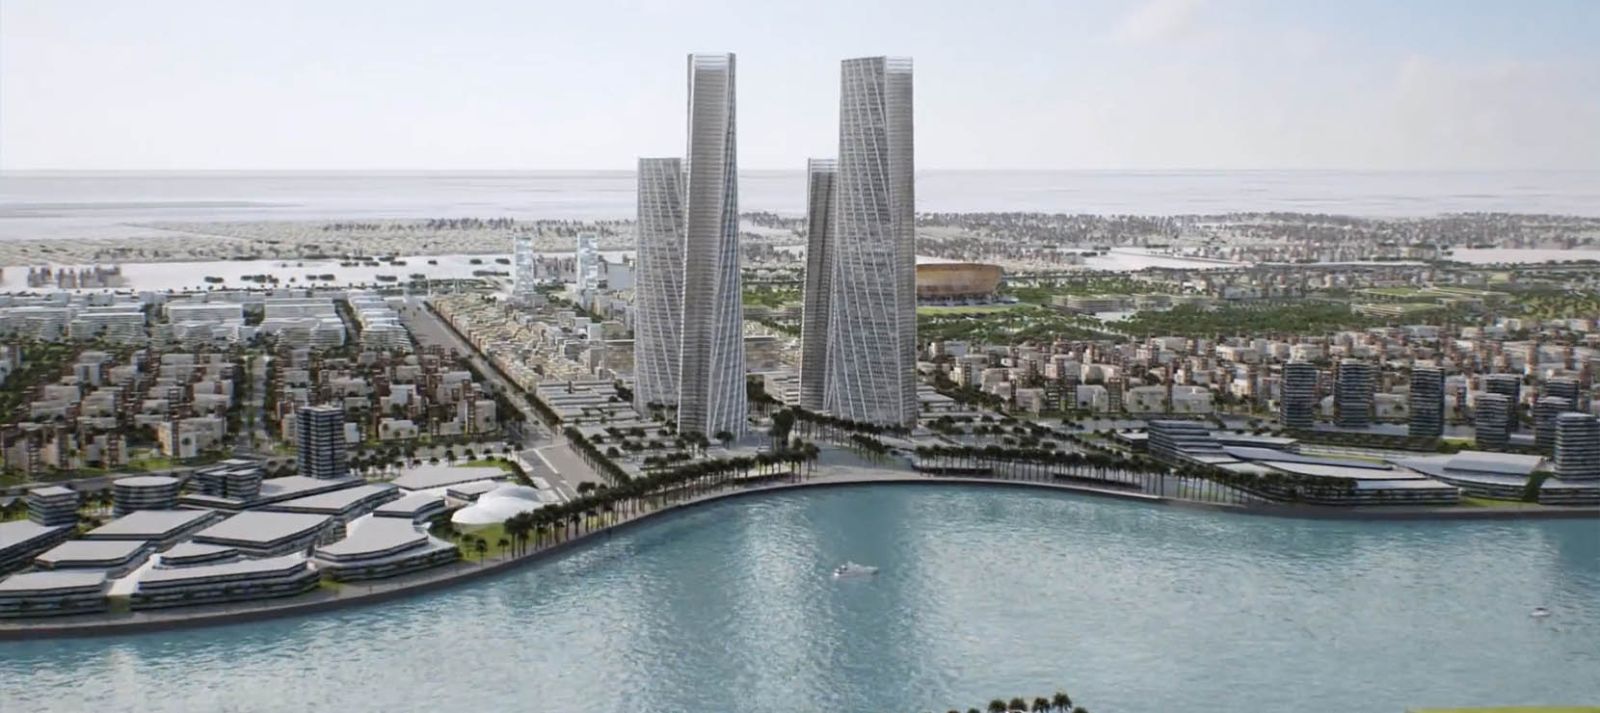 The Lusail City